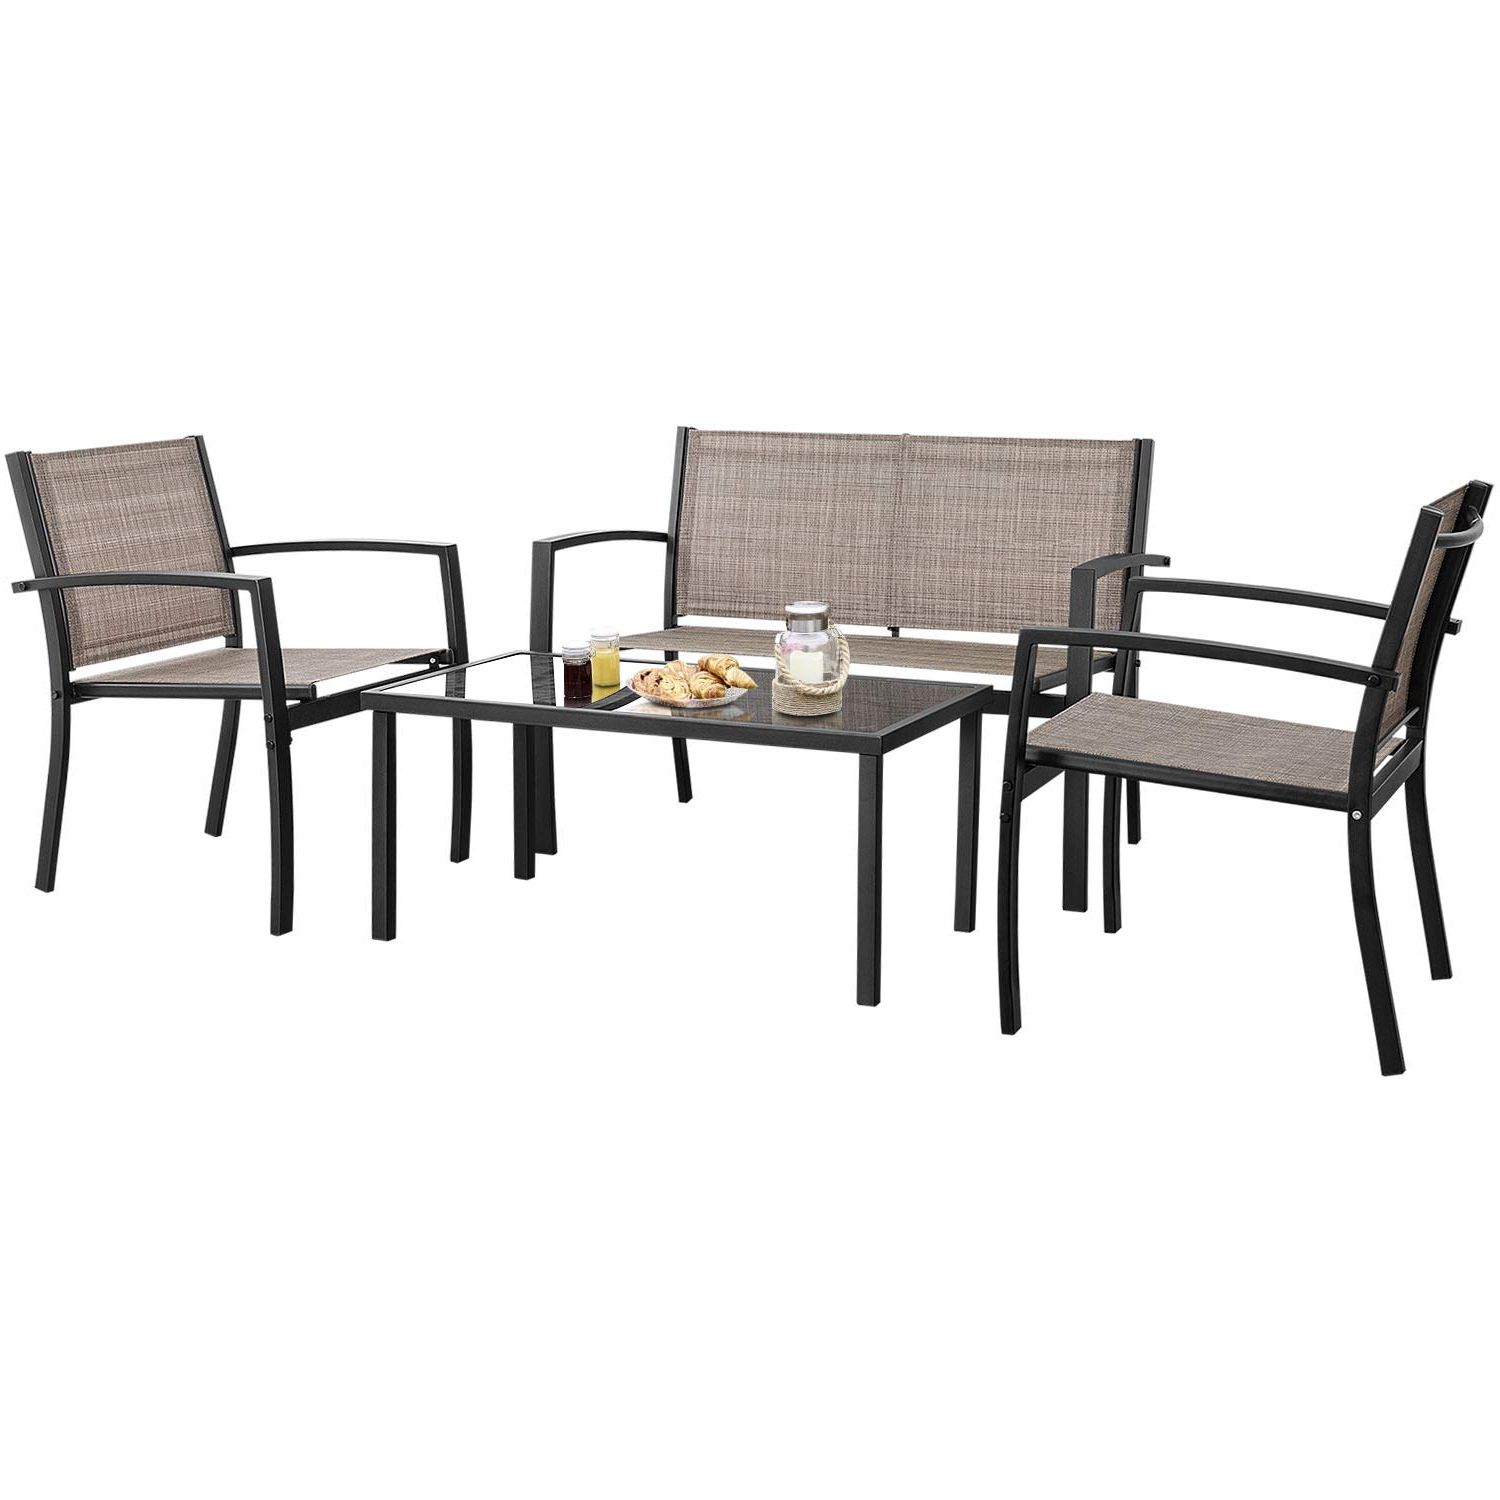 Most Popular Walnew 4 Pieces Patio Furniture Outdoor Furniture Outdoor Patio With Regard To Black Outdoor Modern Chairs Sets (View 9 of 15)